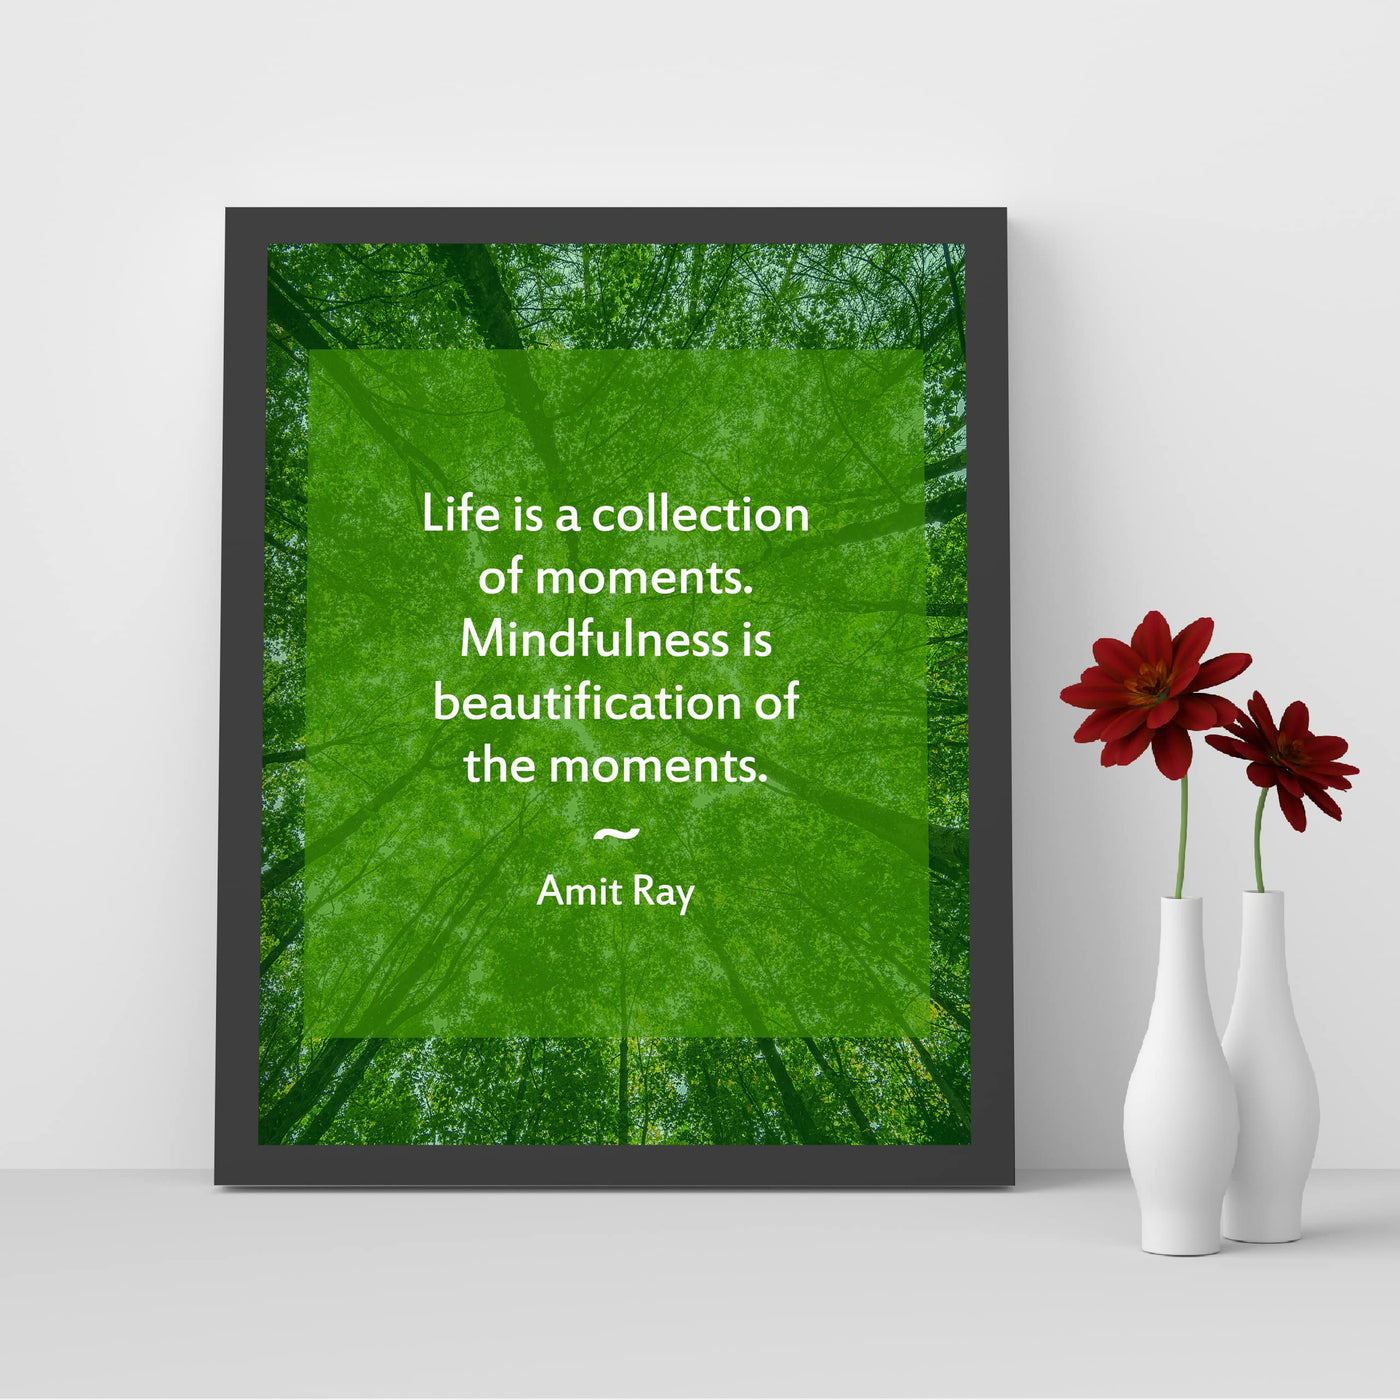 Life is a Collection of Moments- Inspirational Quotes Wall Art - 8 x 10" Forest Trees Photo Print -Ready to Frame. Motivational Home-Office-Studio Decor-Decorations. Great Zen - Mindfulness Decor!